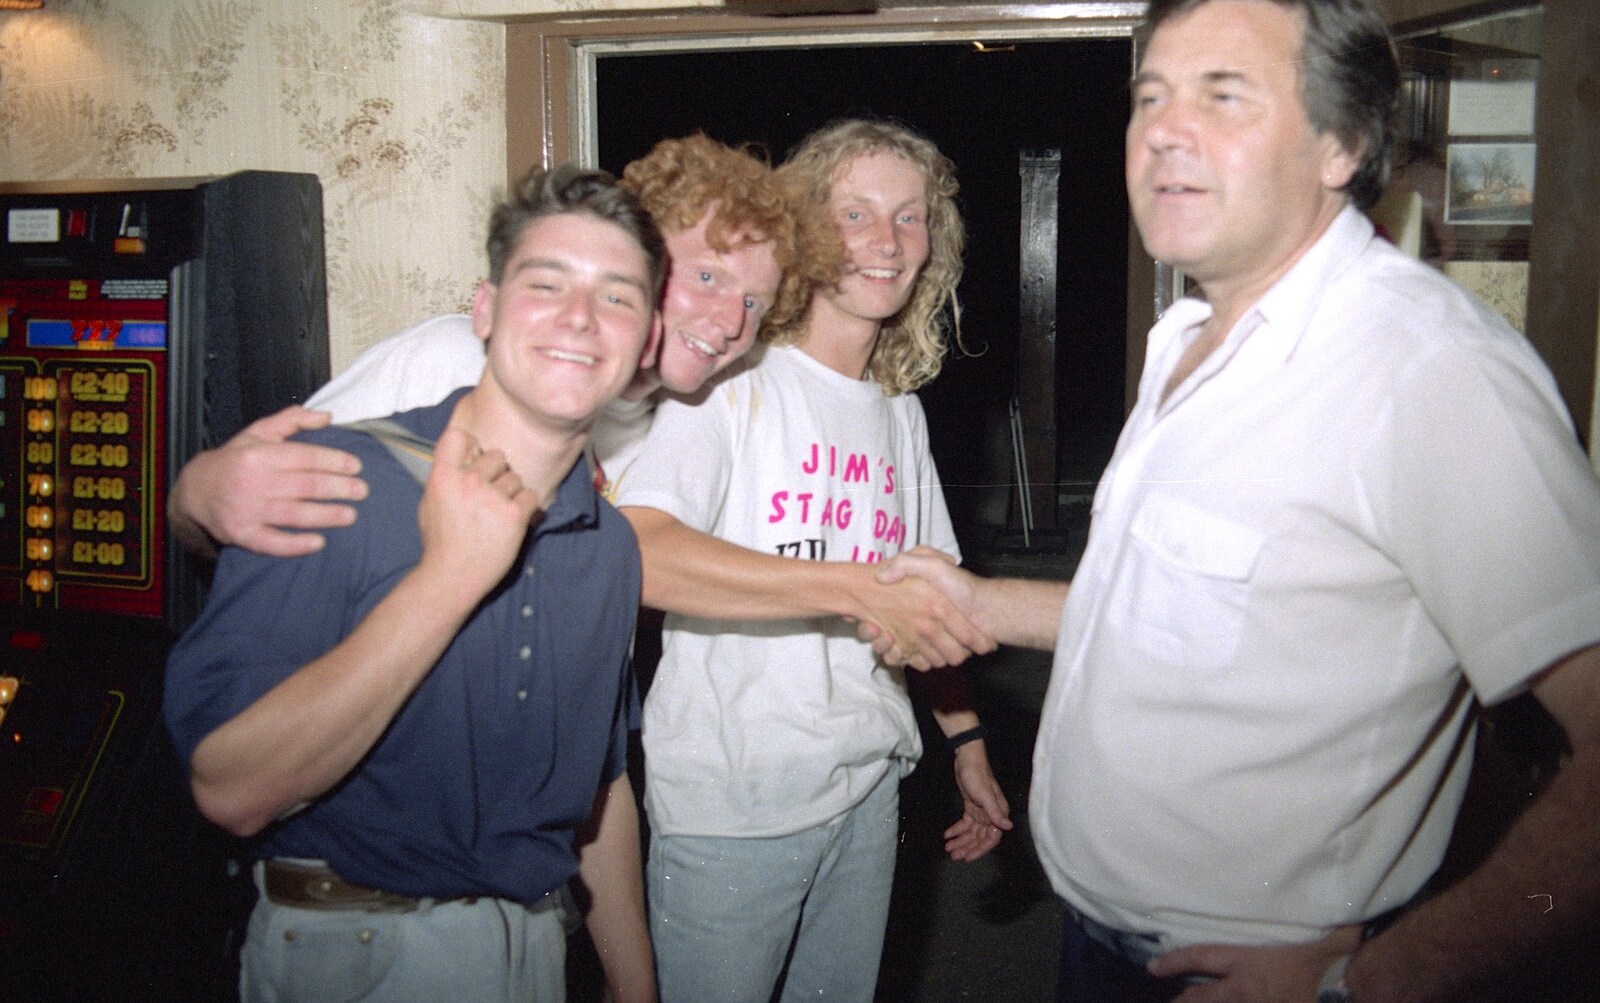 Wavy shakes Alan's hand from Jim's Stag Day and a Stripper, Brome Swan, Suffolk - 17th July 1993